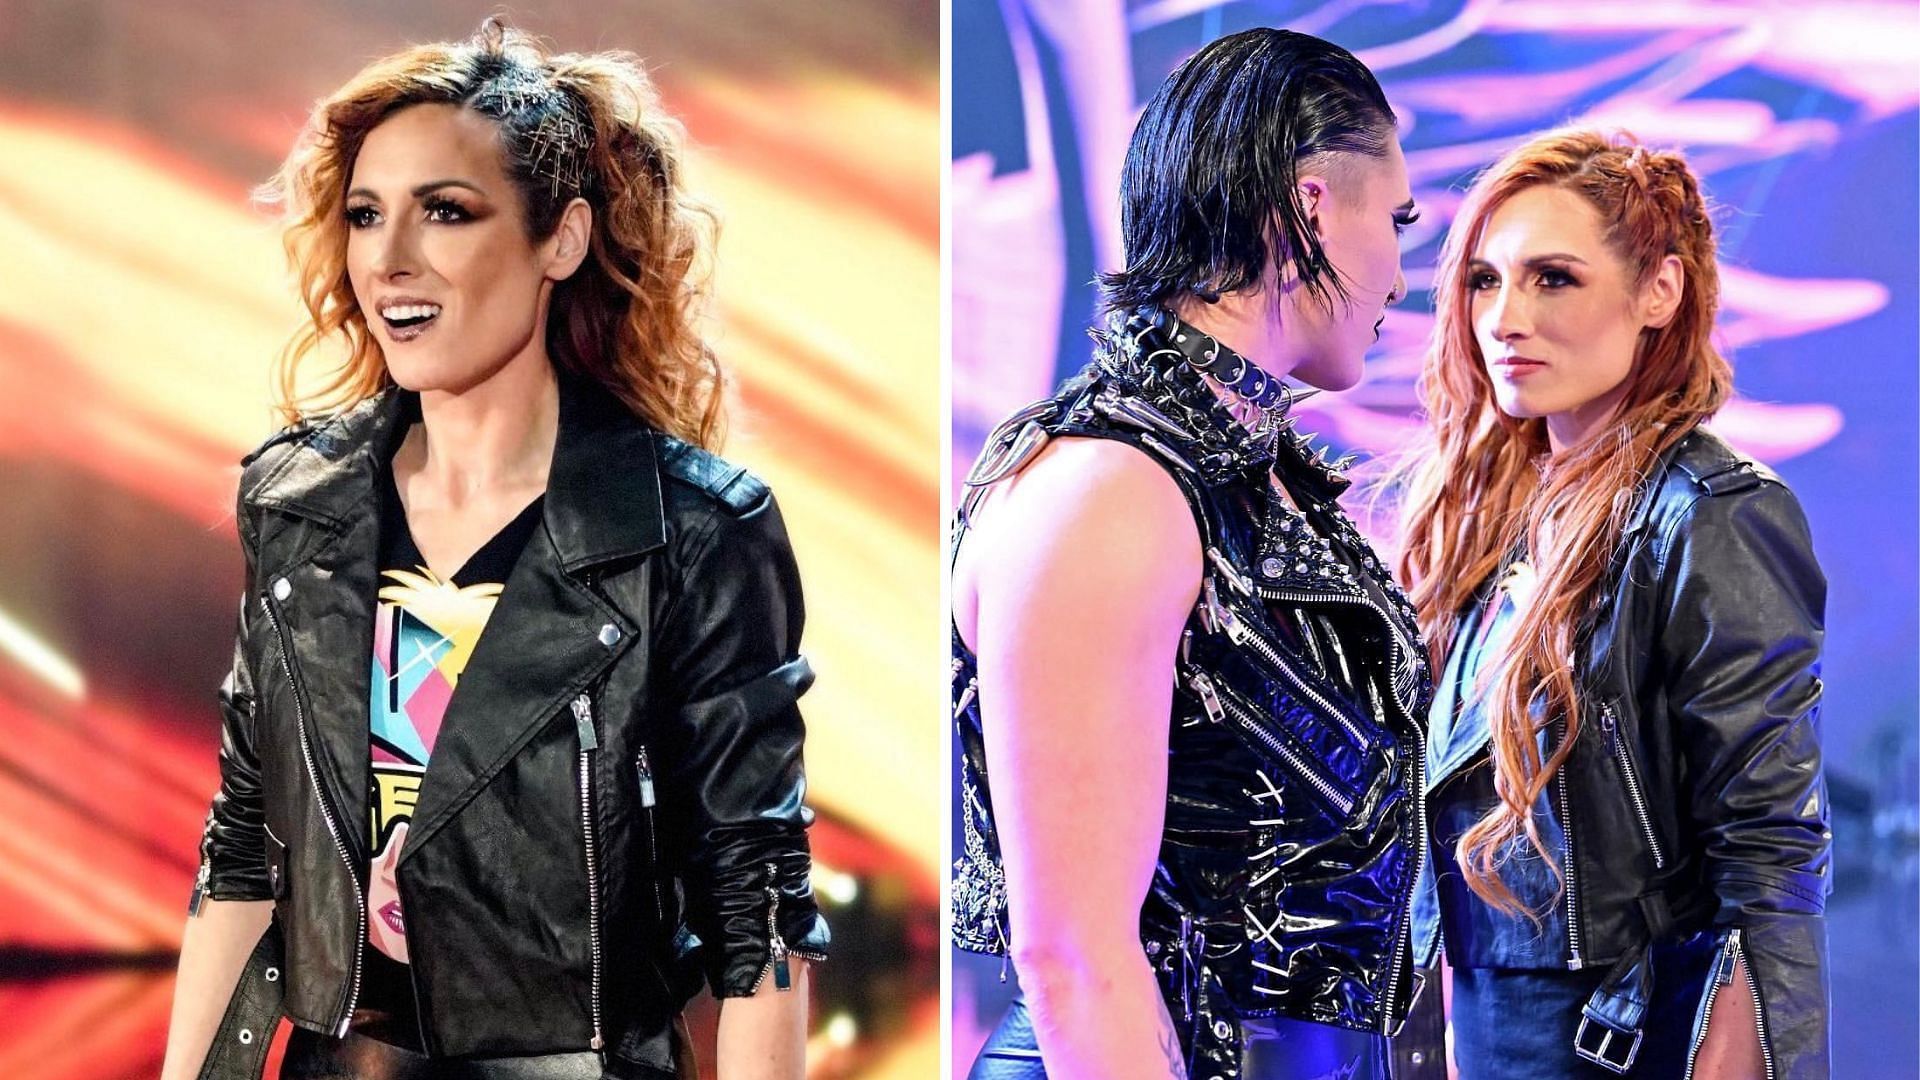 Becky Lynch recently returned to WWE after suffering an injury